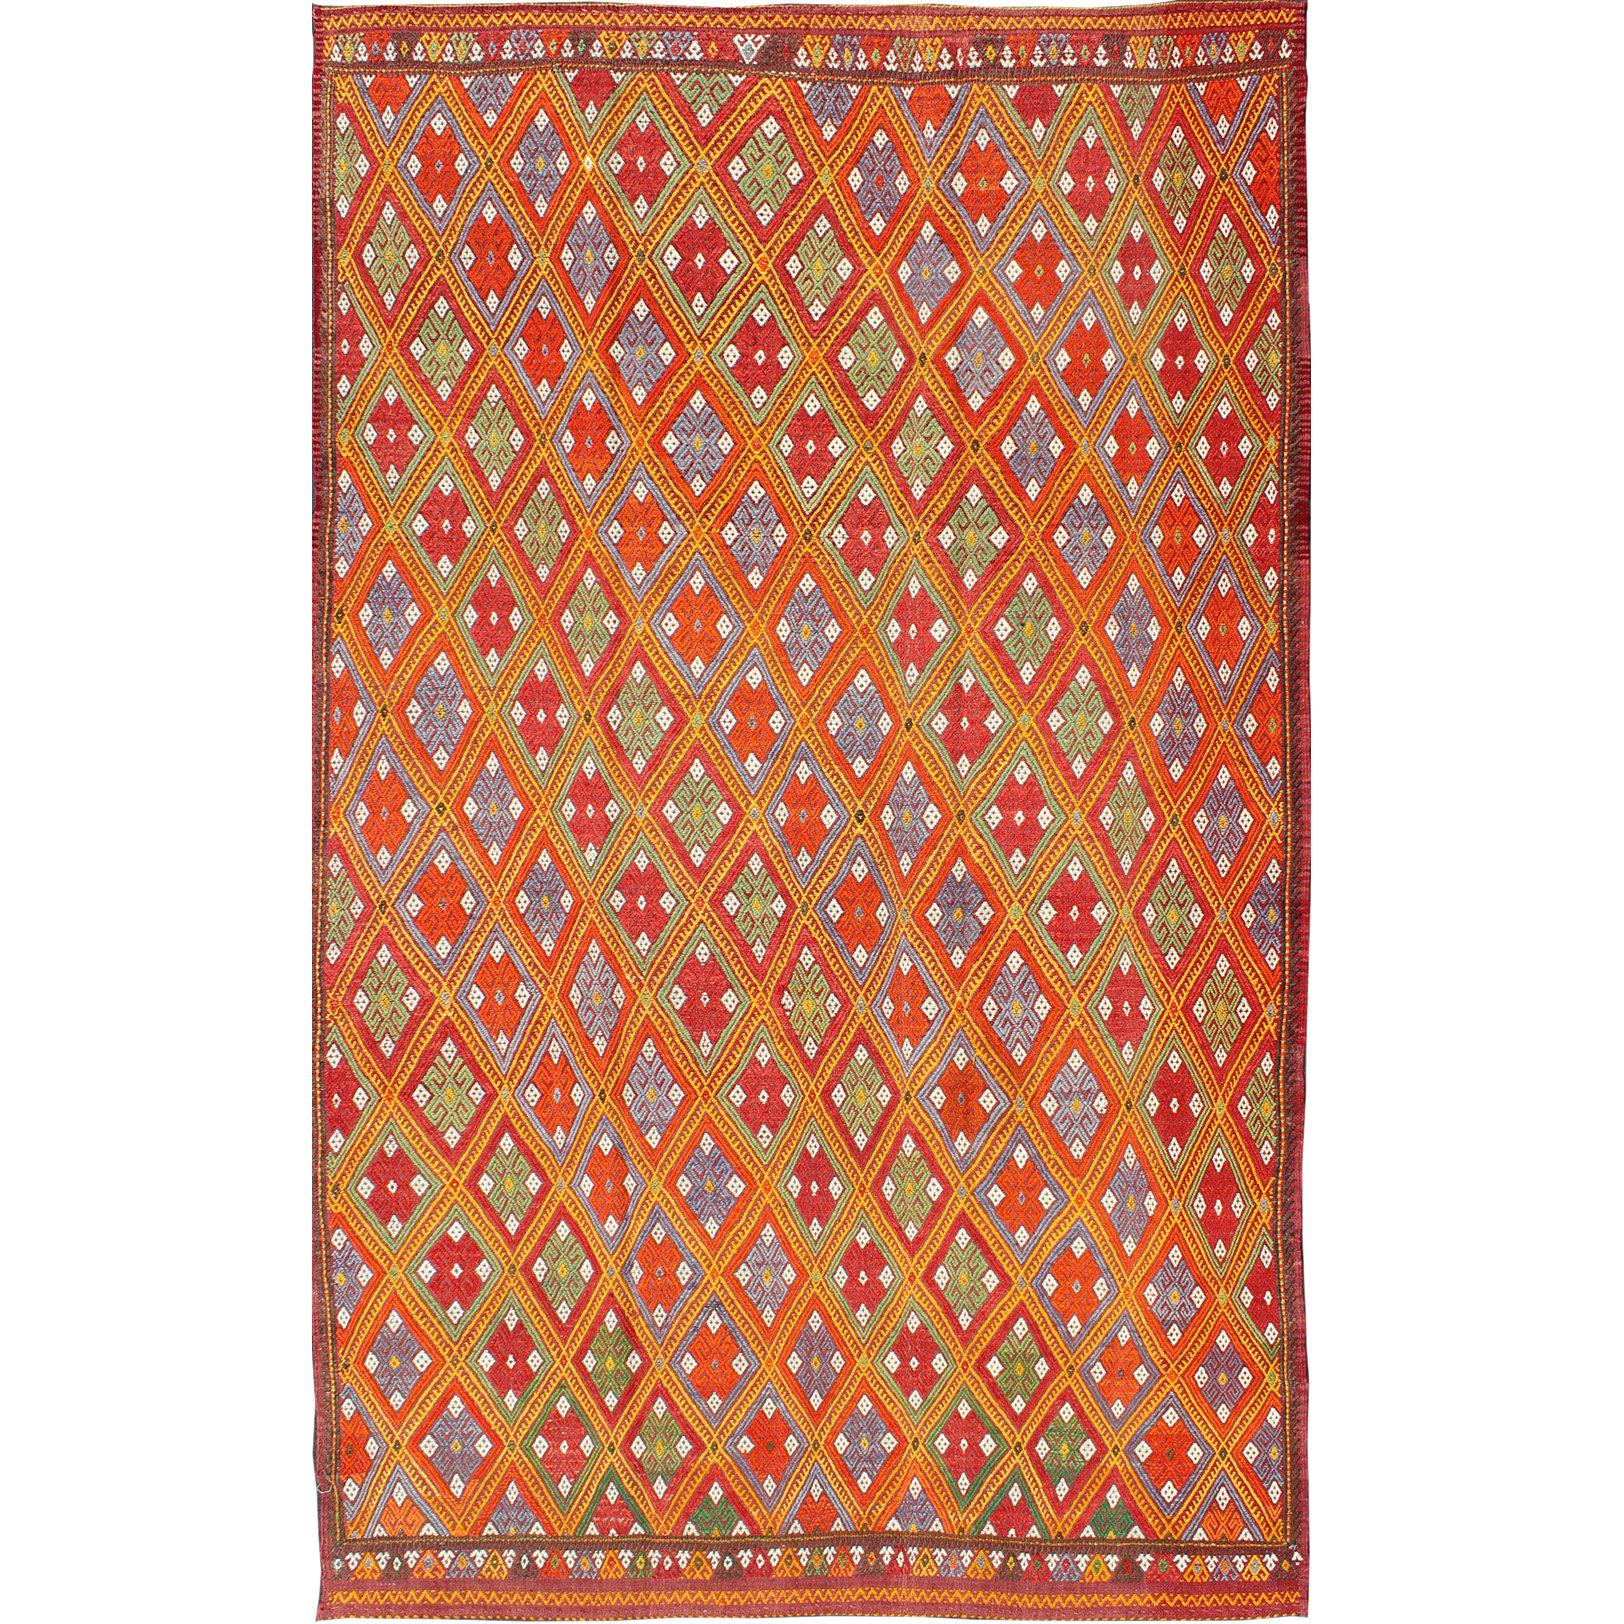 Vintage Fine Embroidered Jijim Rug with Diamond Design in Bright Colors